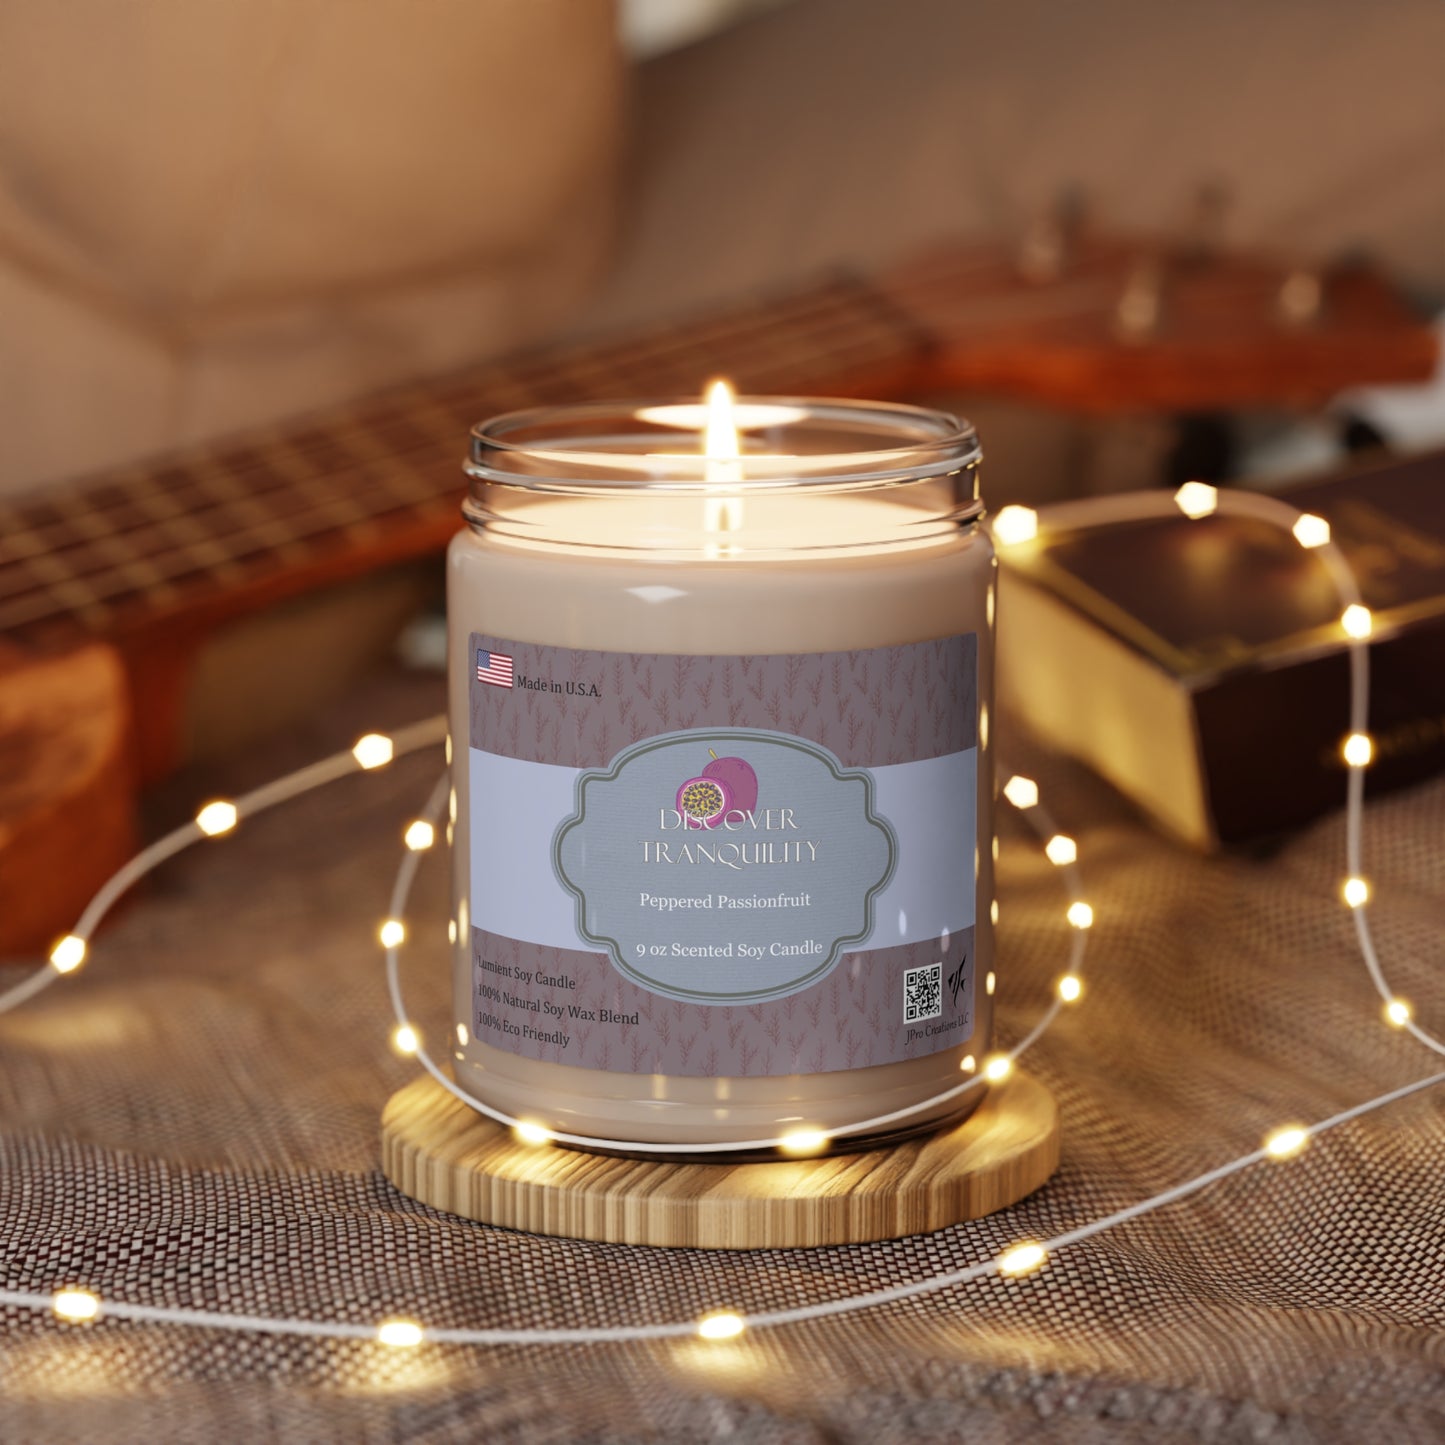 Discover Tranquility Scented Soy Candle, 9oz